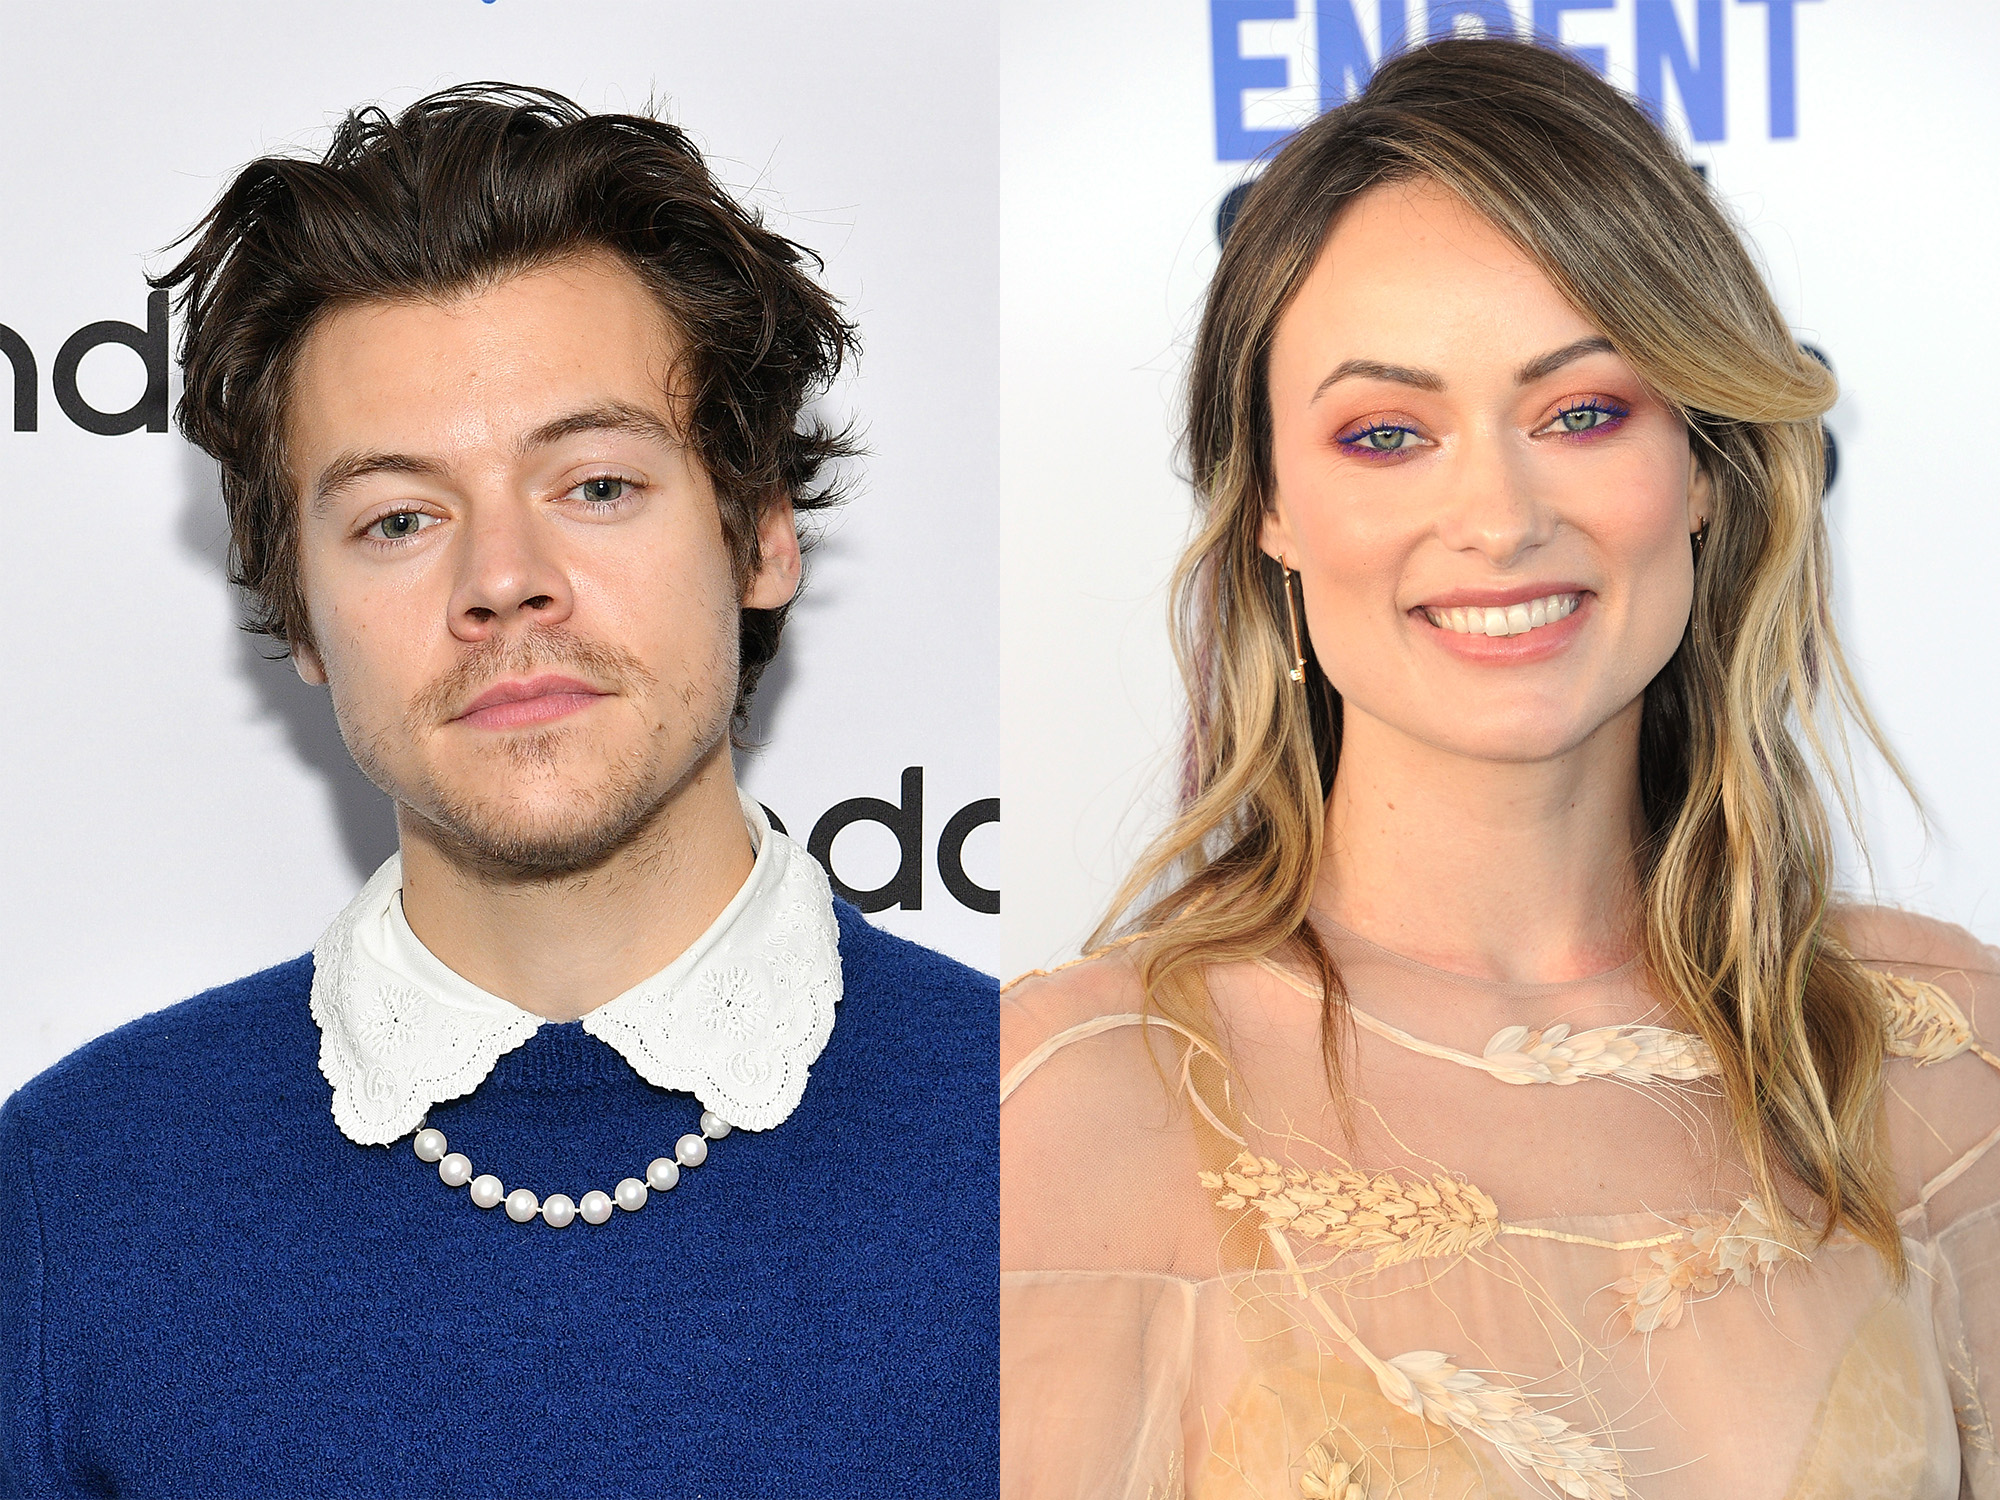 Olivia Wilde Is the Most Supportive Partner in Harry Styles's